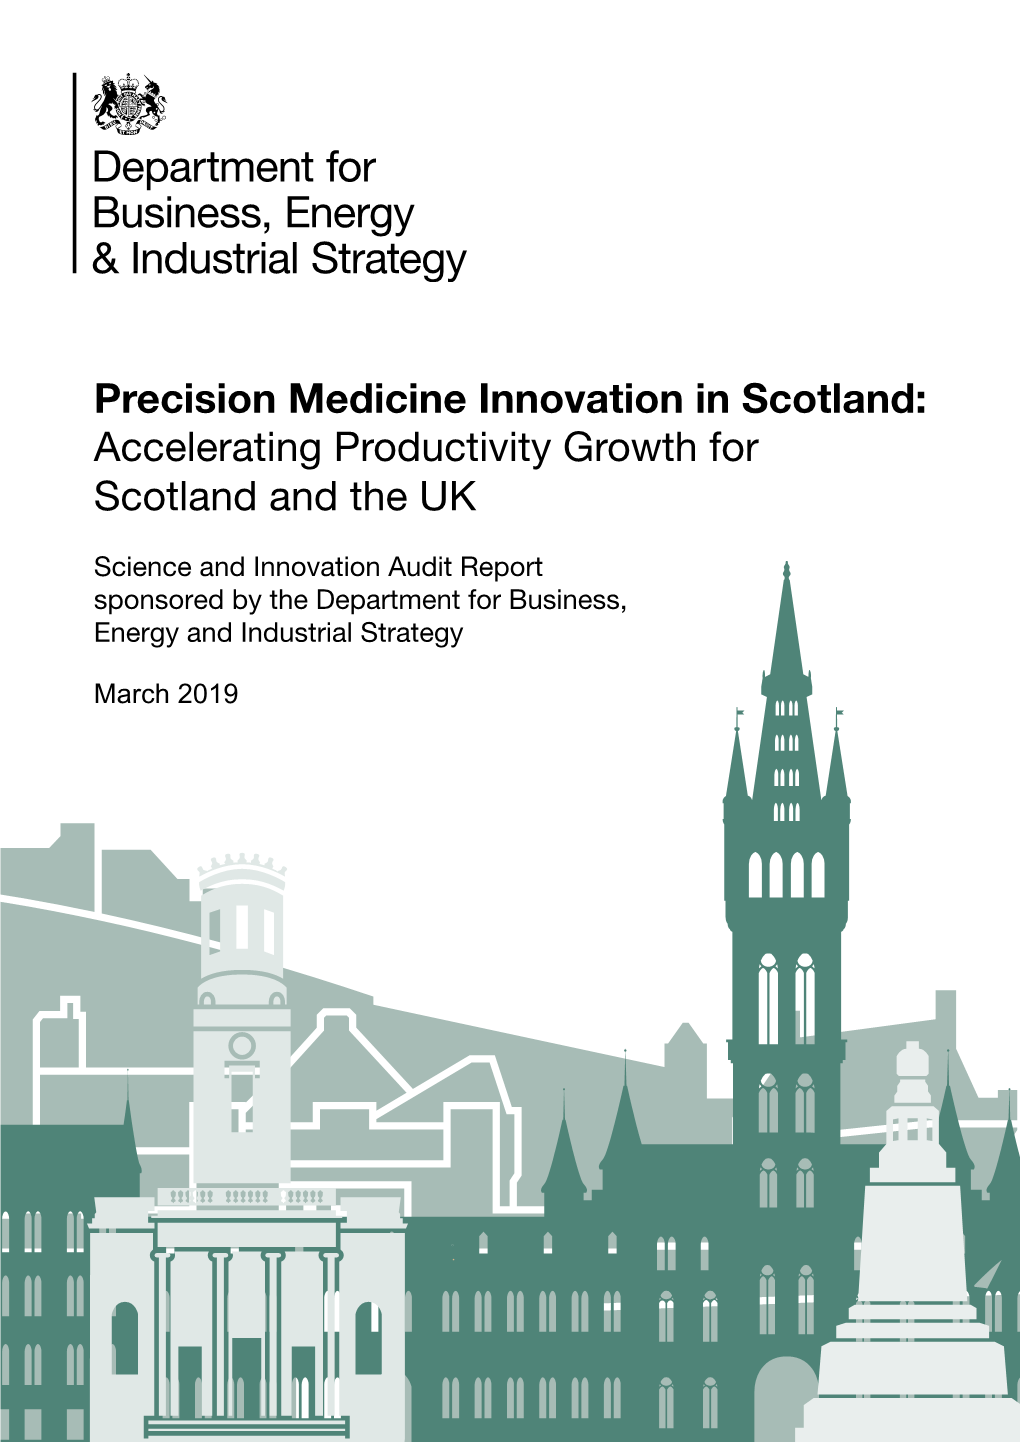 Precision Medicine Innovation in Scotland: Accelerating Productivity Growth for Scotland and the UK